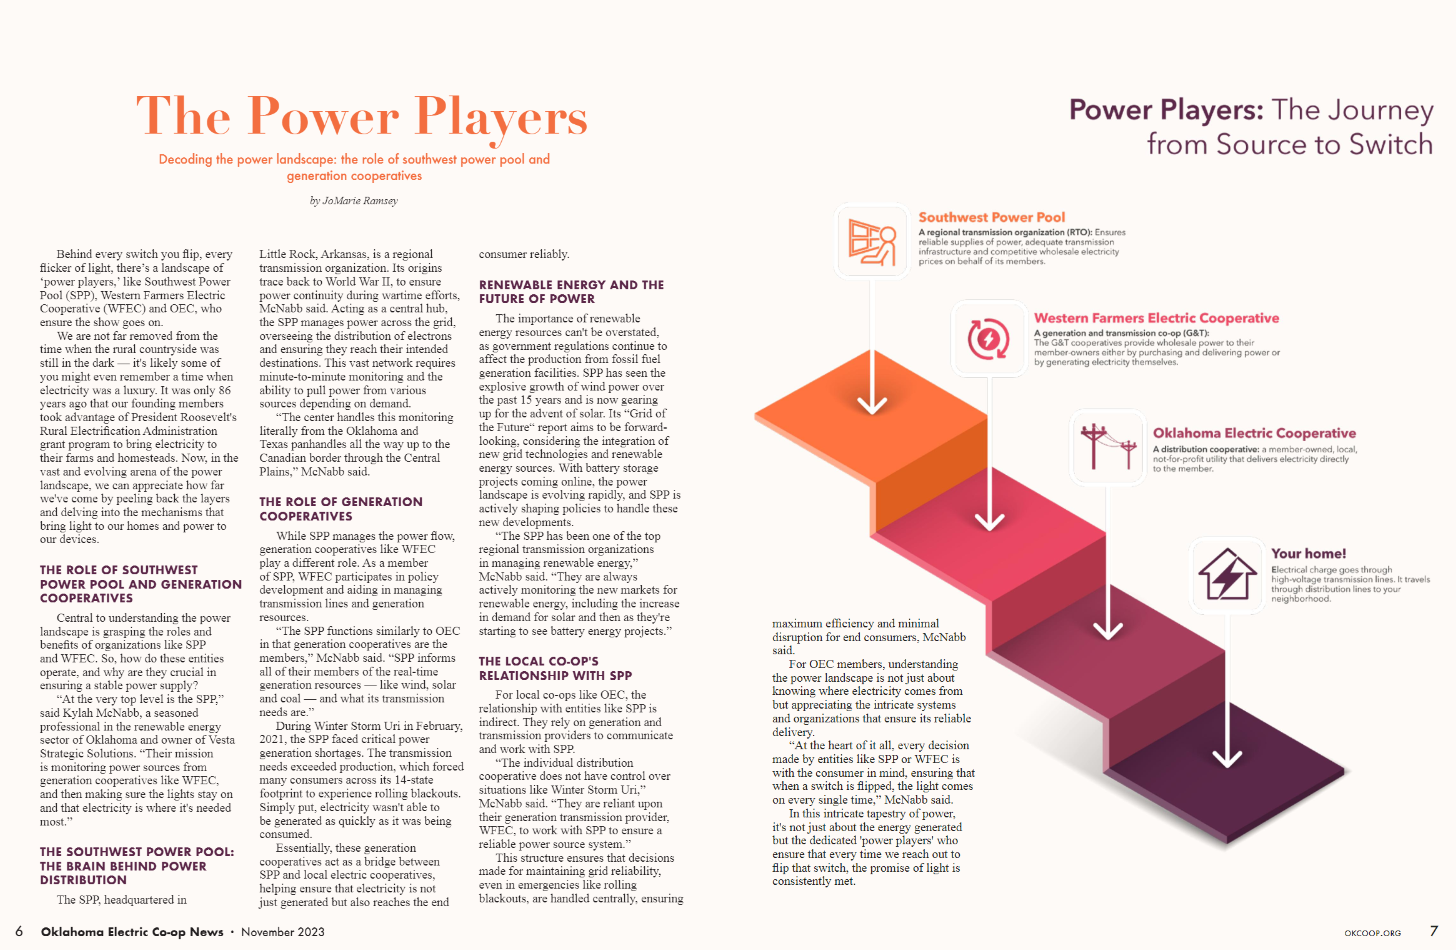 Image of The Power Players article